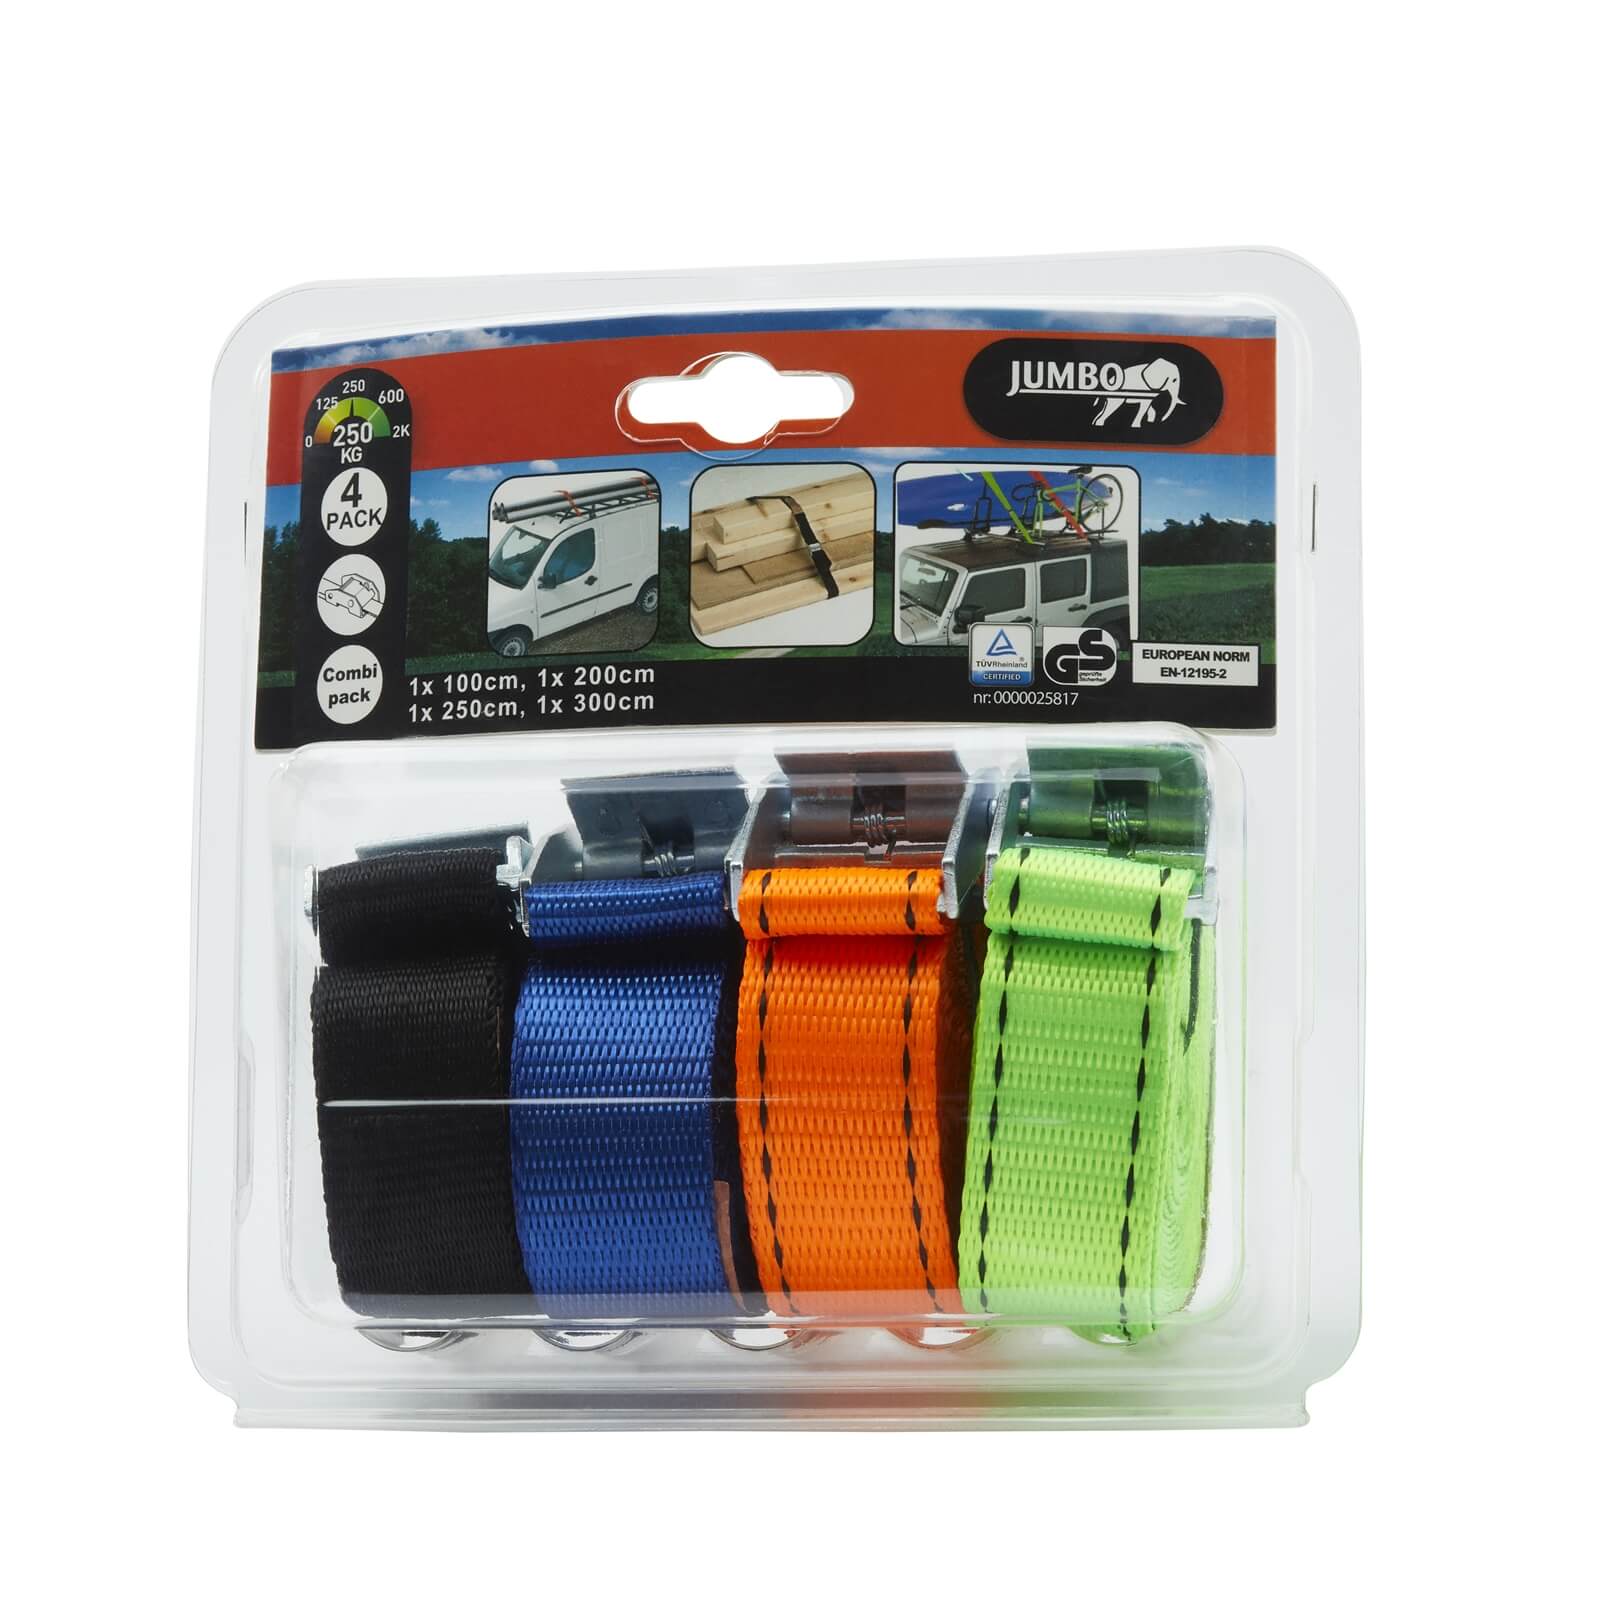 Assorted Cambuckle Set - 4 Pack